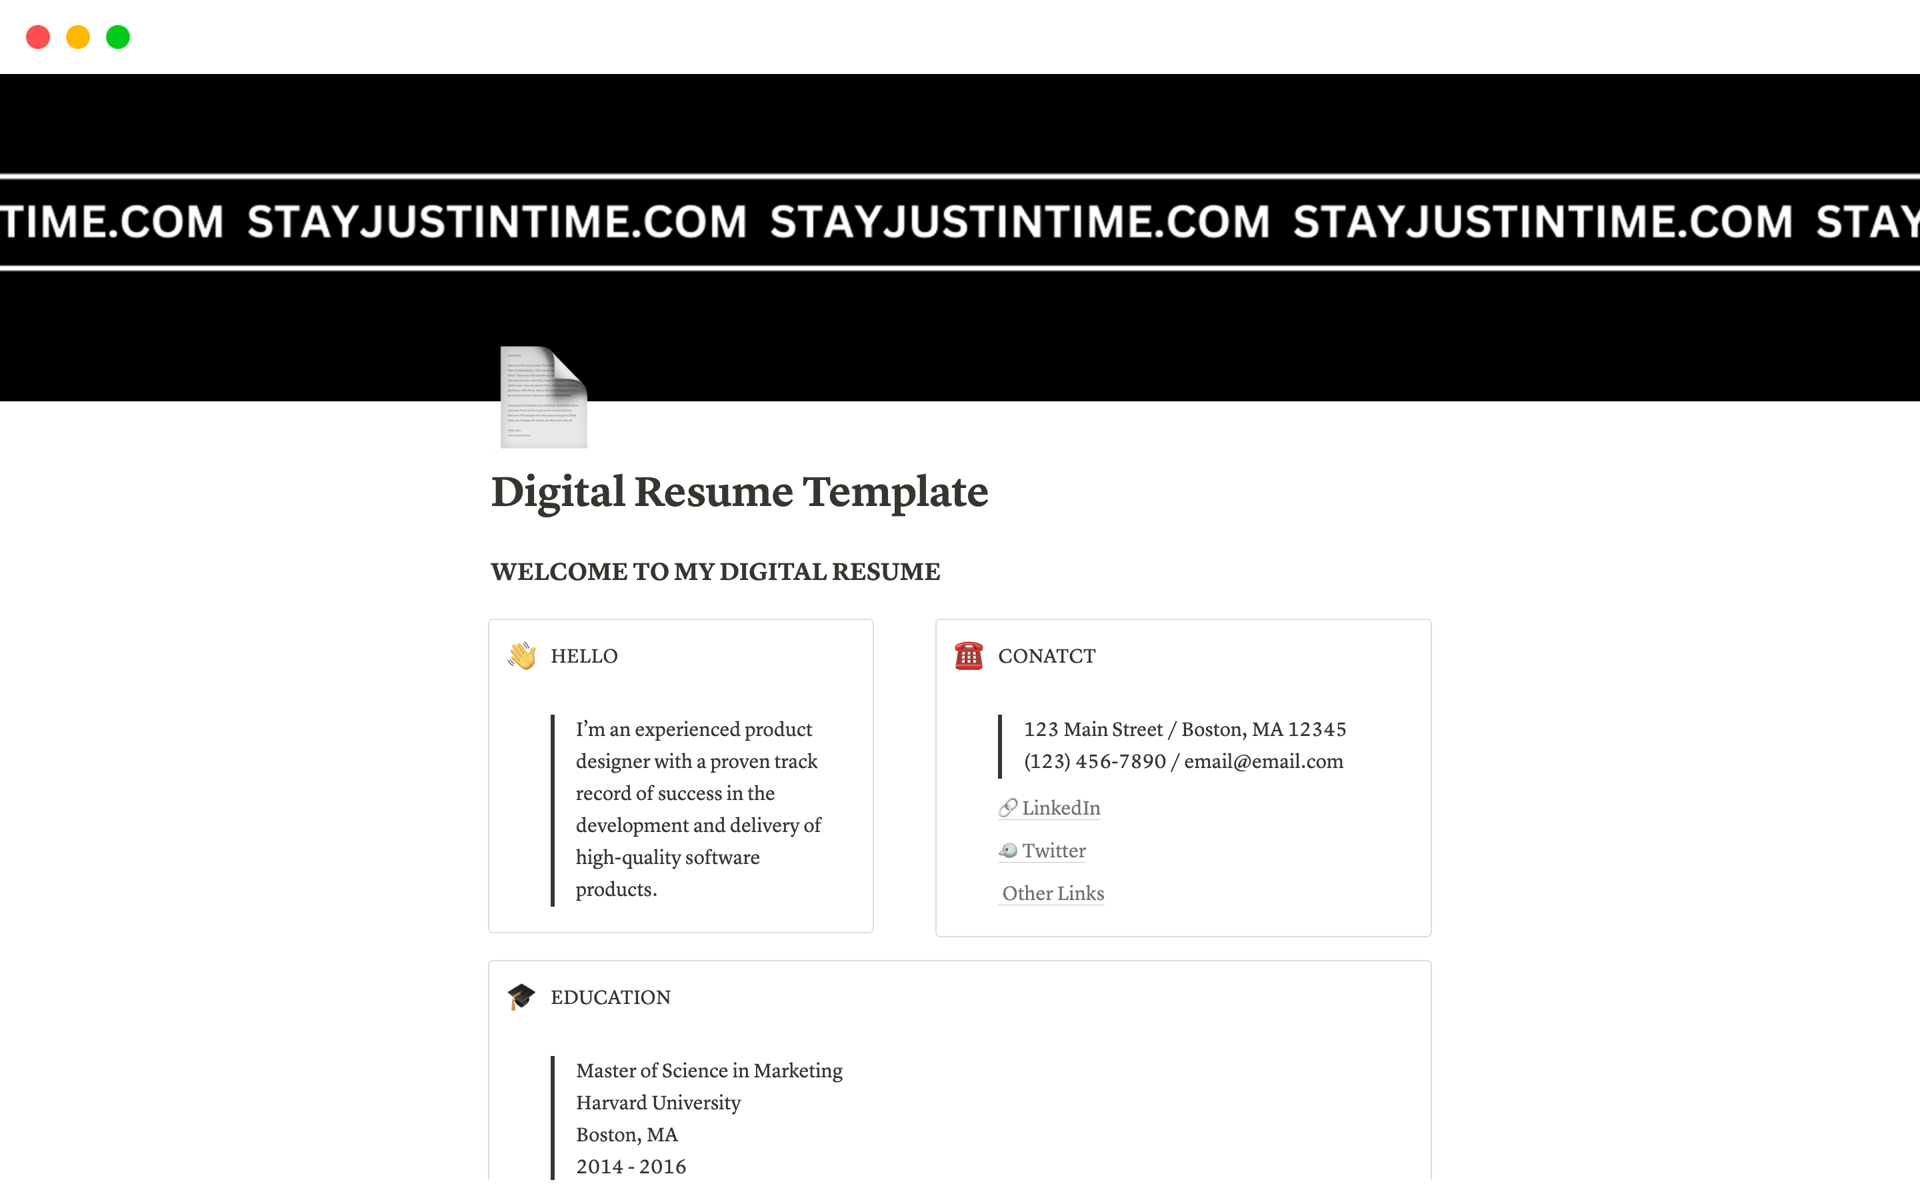 A template preview for Digital Resume